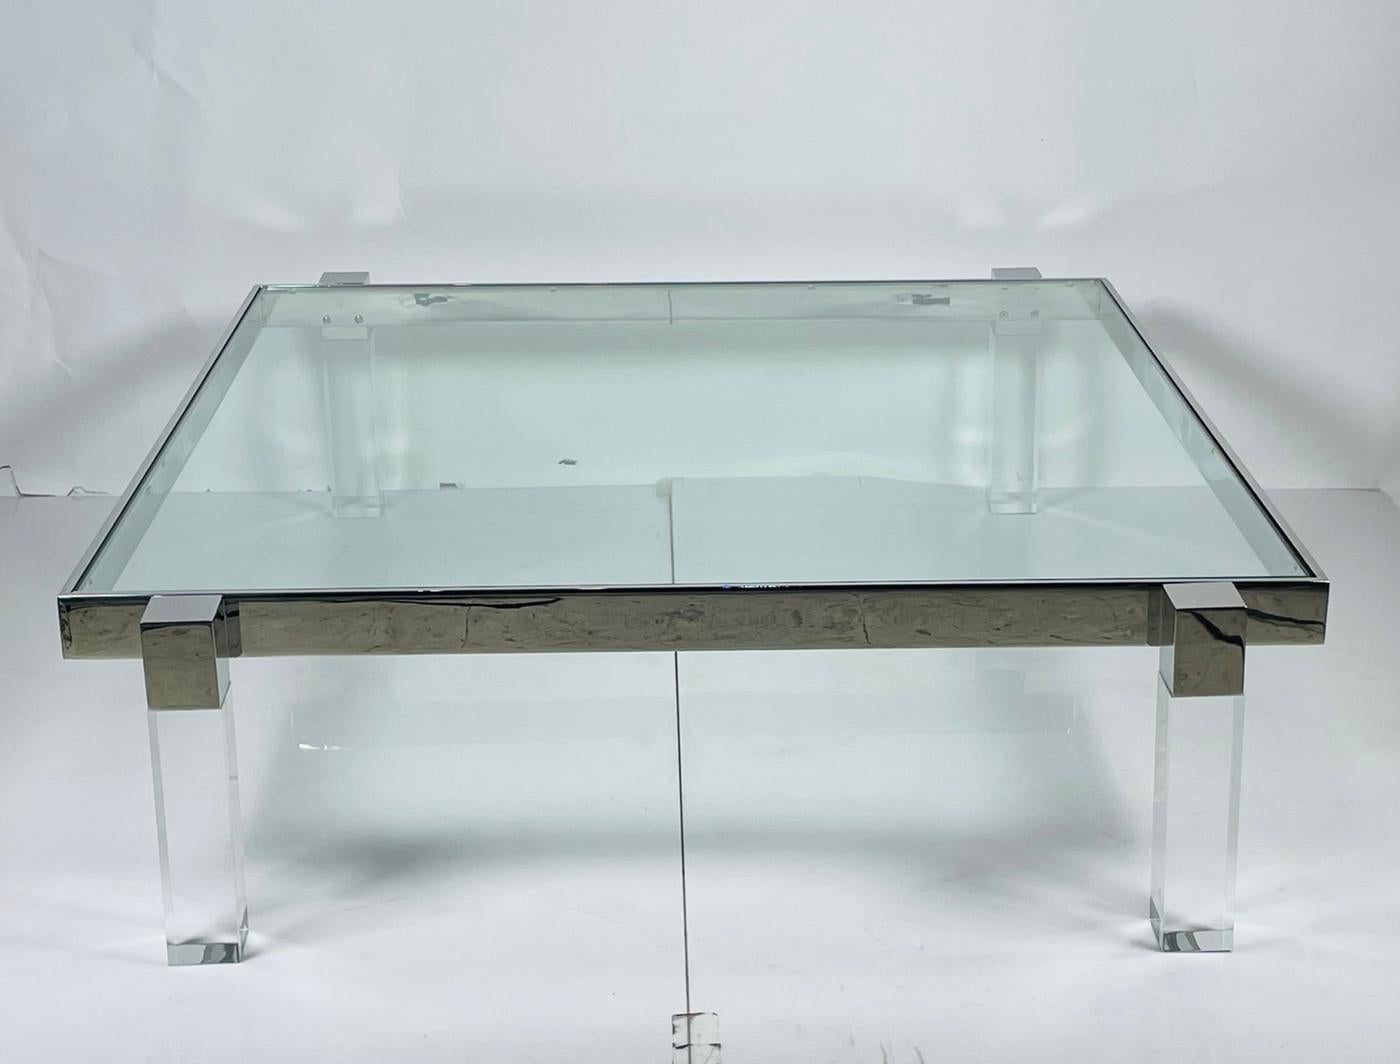 Stunning coffee table designed and manufactured by Amparo Calderon Tapia.

The piece is hand crafted in Los Angeles, the frame is solid Stainless steel which is then highly polished close to a mirror finish.
The legs are 3 inch square solid